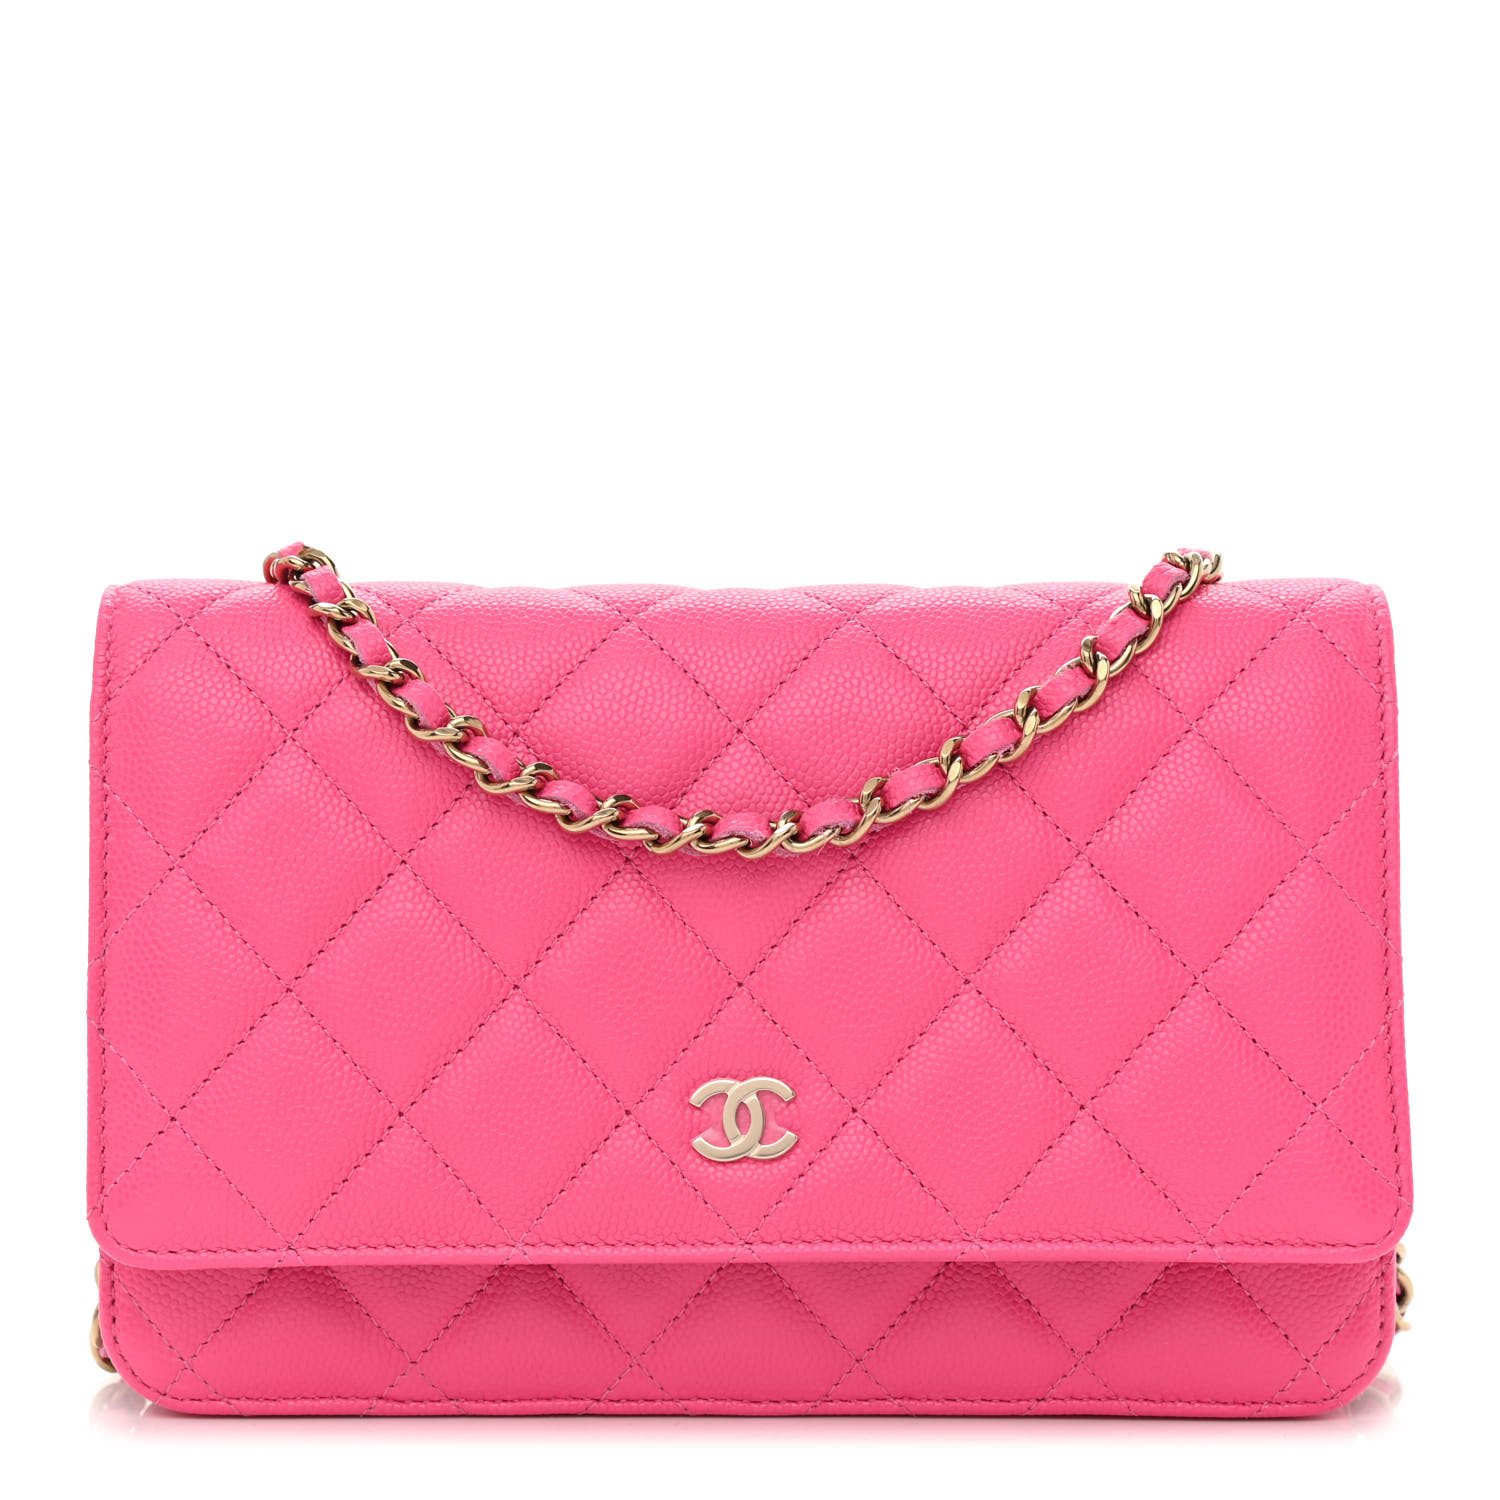 100+ affordable chanel classic pink For Sale